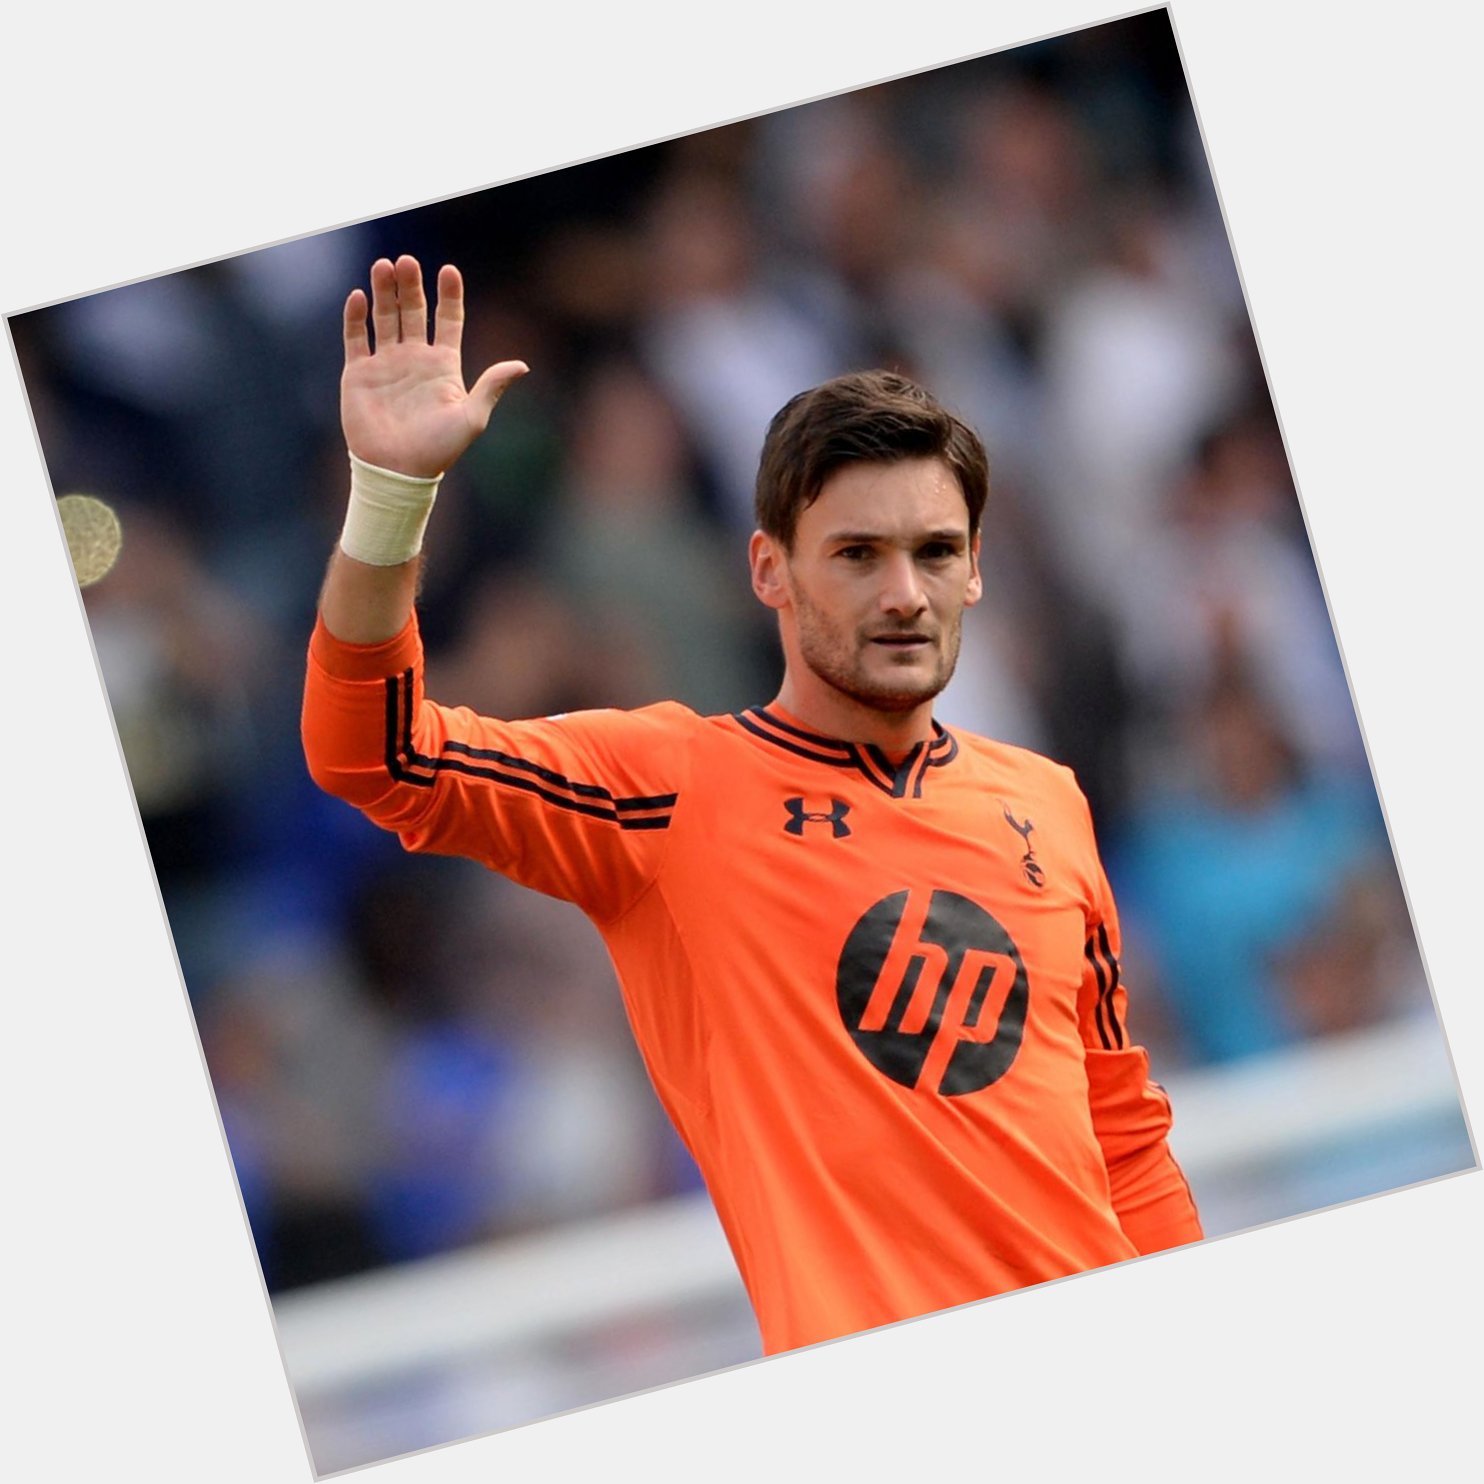 Happy Birthday Hugo Lloris. 3 points today should be a great present  